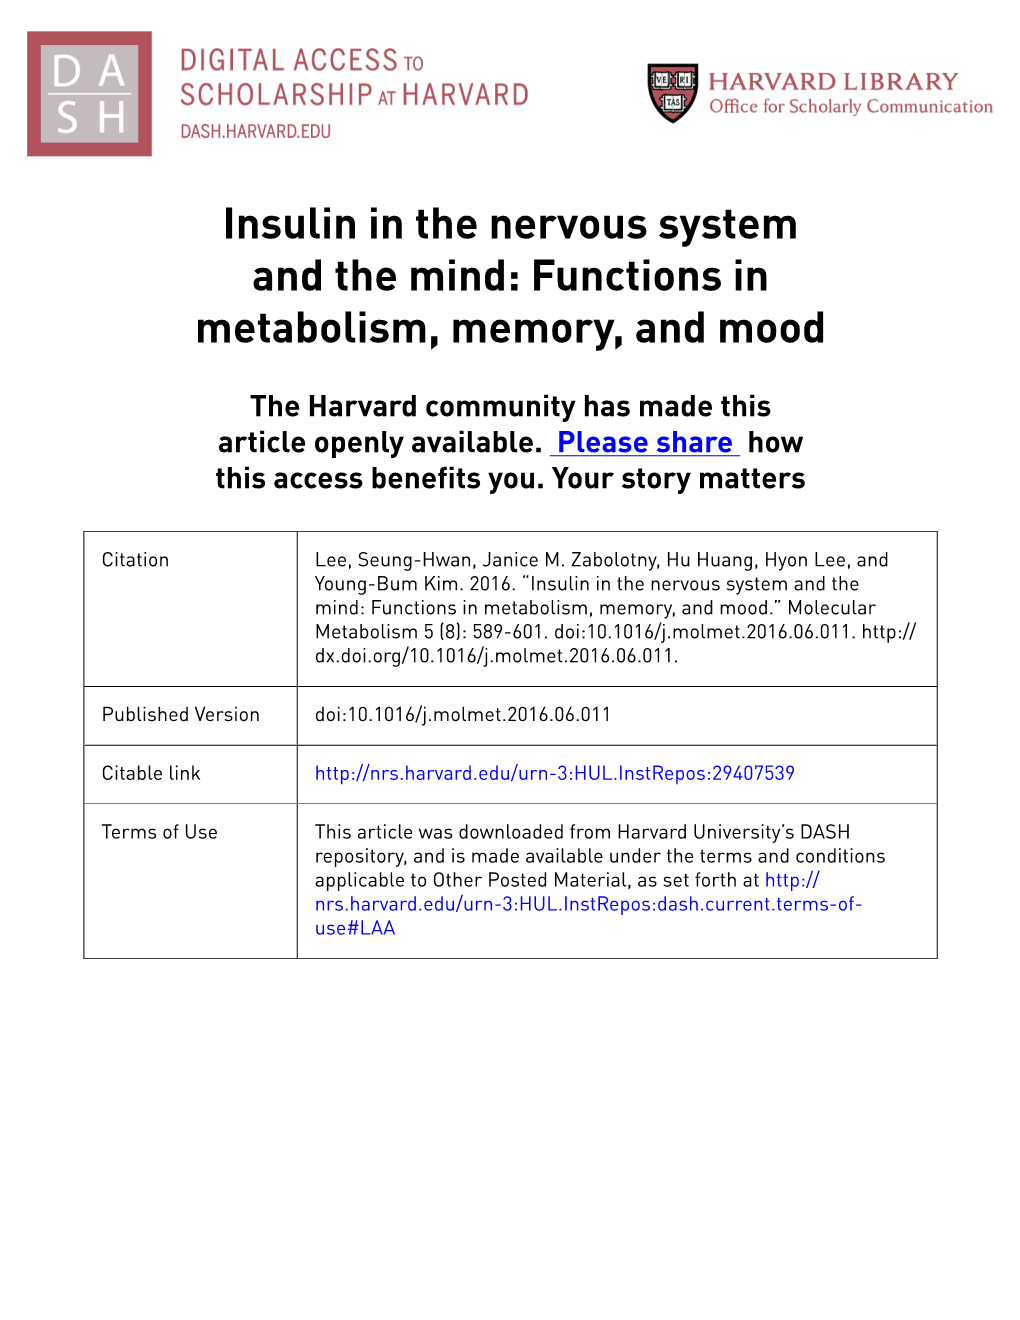 Insulin in the Nervous System and the Mind: Functions in Metabolism, Memory, and Mood